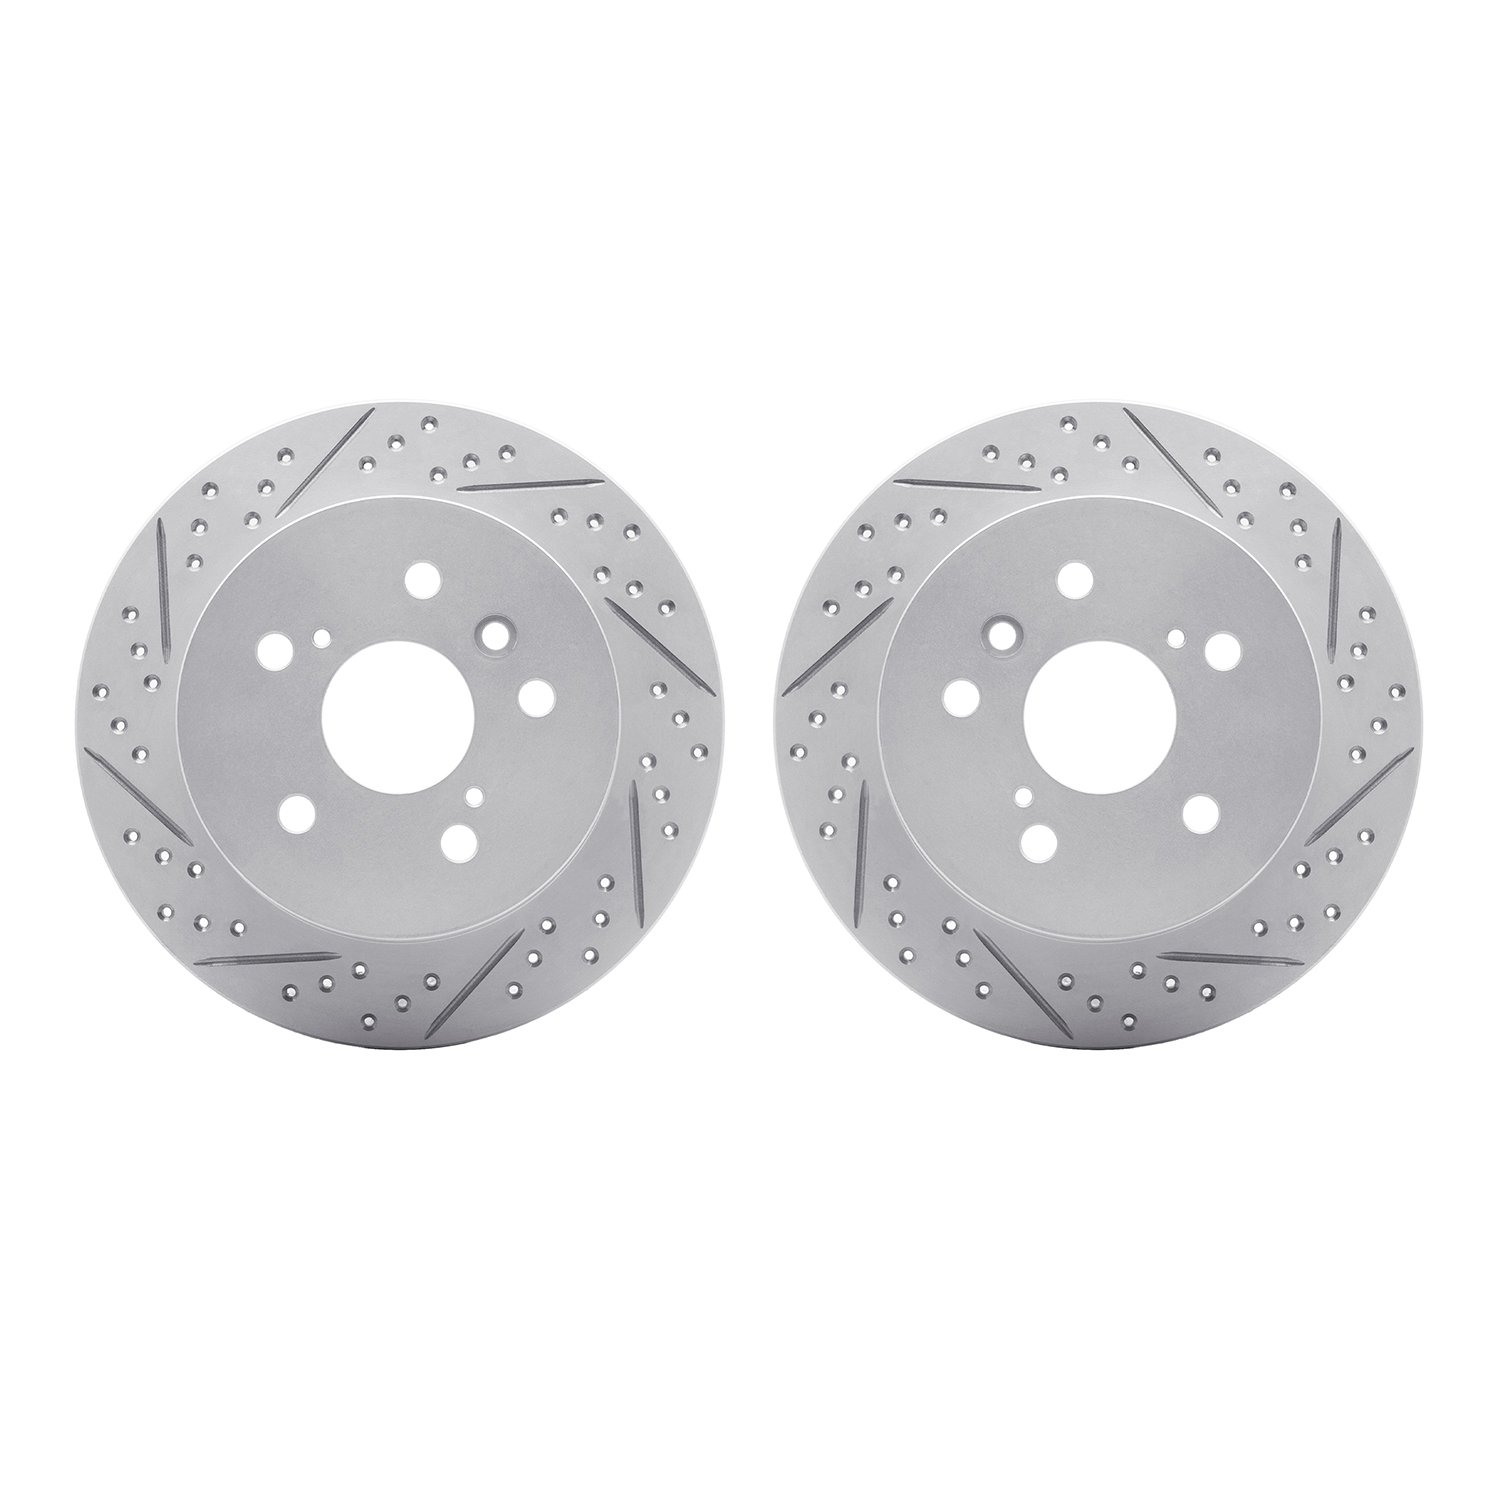 2002-76044 Geoperformance Drilled/Slotted Brake Rotors, 2007-2012 Lexus/Toyota/Scion, Position: Rear